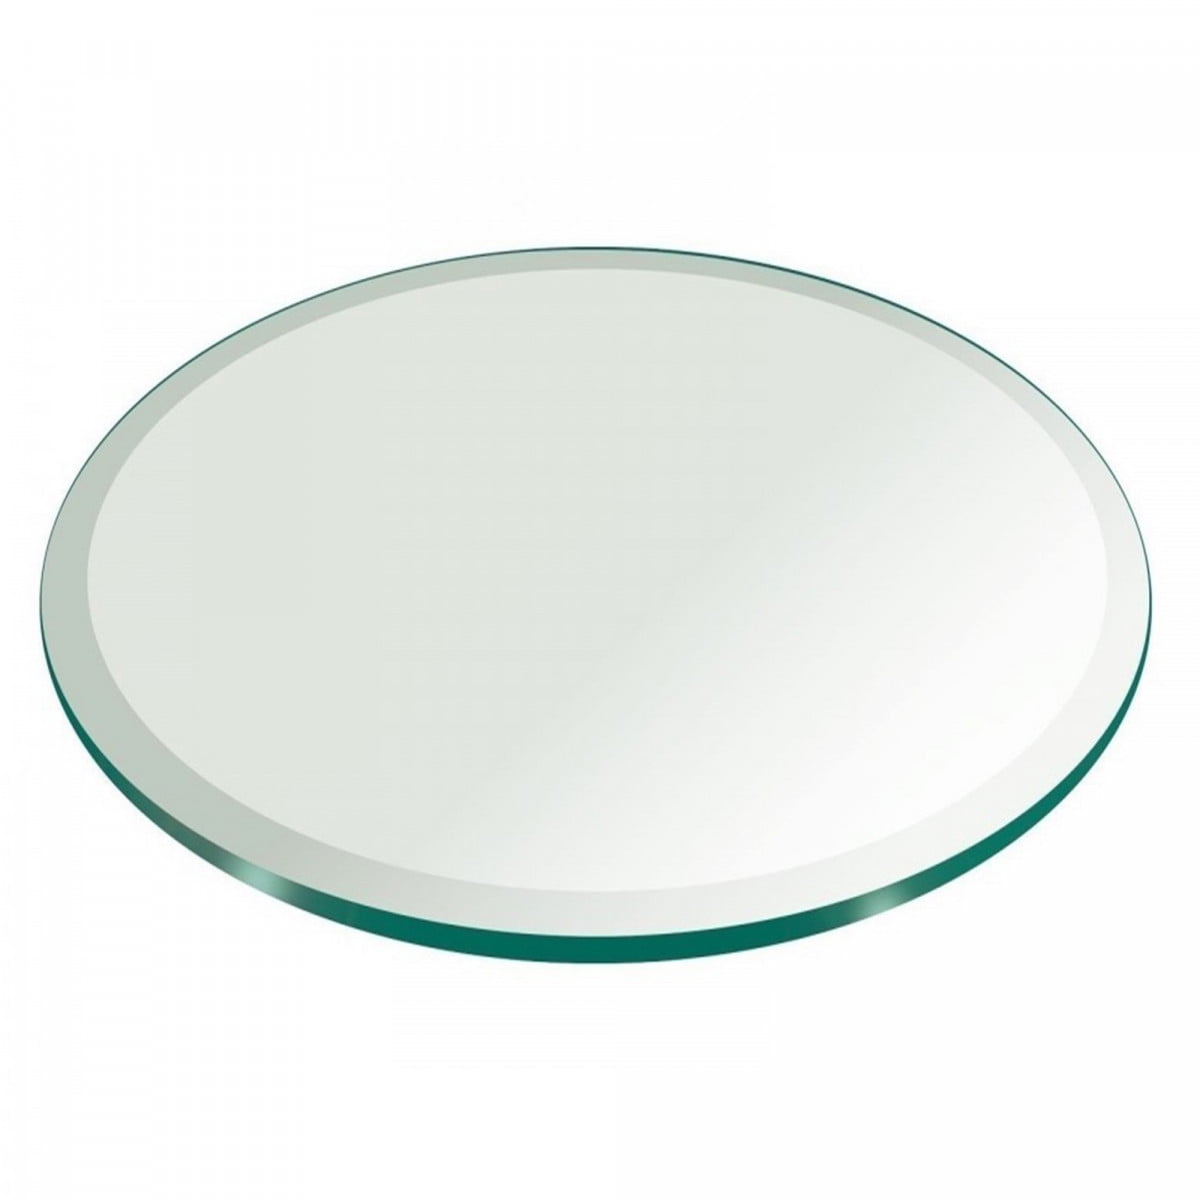 Glass Table Top 36 inch Round 3/8 inch Thick Flat Polish Tempered